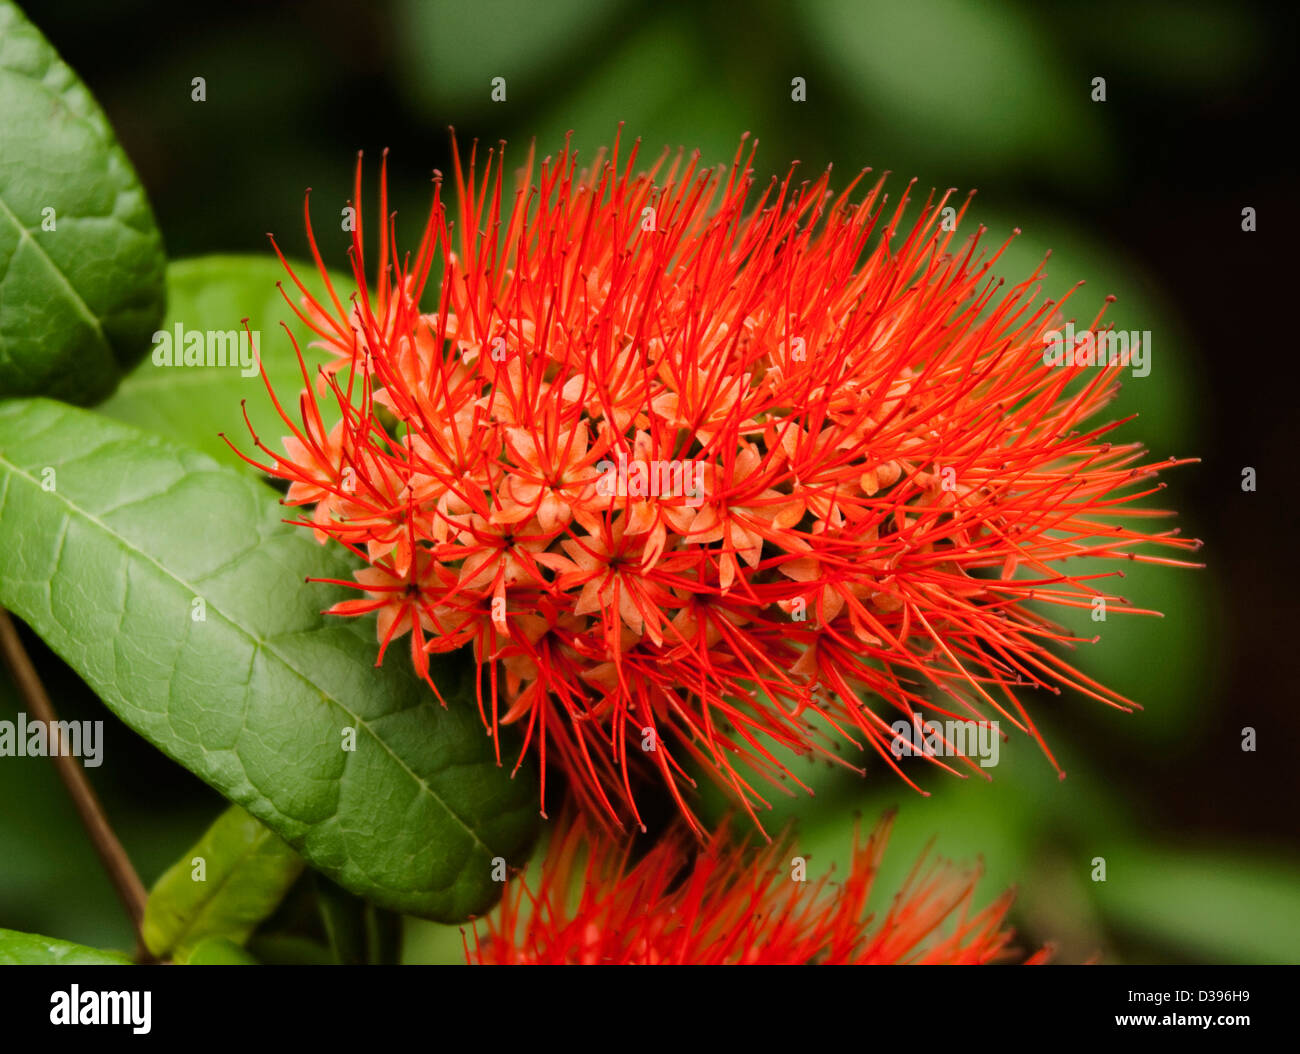 Spectacular vivid fire red flowers and green leaves of Combretum constrictum - Thailand powderpuff shrub Stock Photo